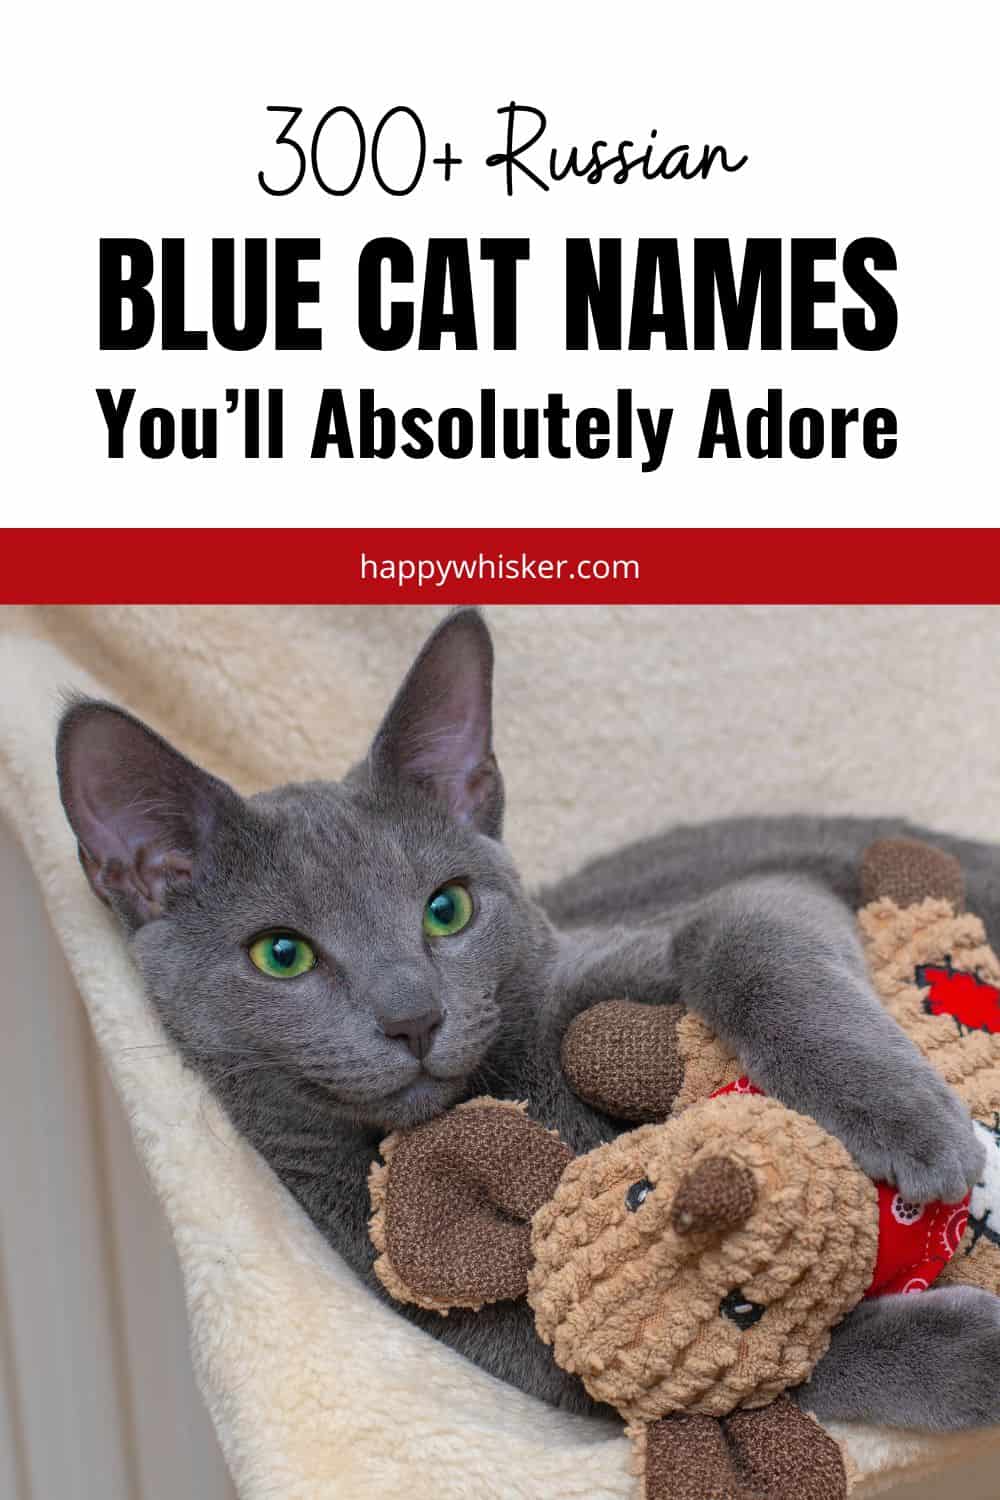 300+ Russian Blue Cat Names You’ll Absolutely Adore Pinterest